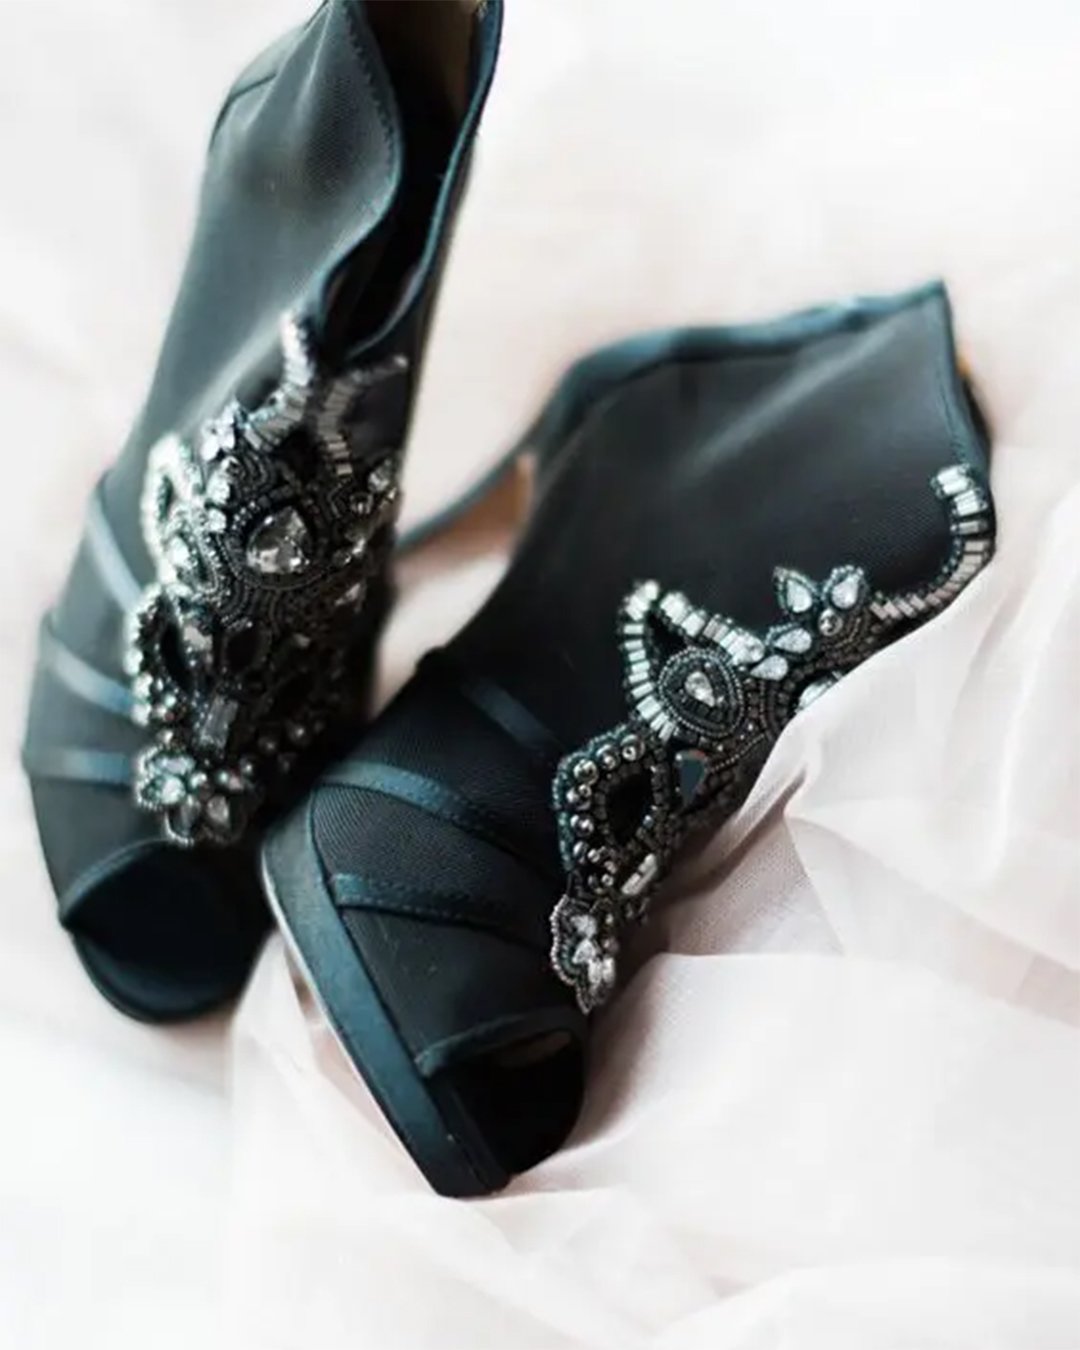 black shoes for wedding bootiest with peep toes crystal badgley